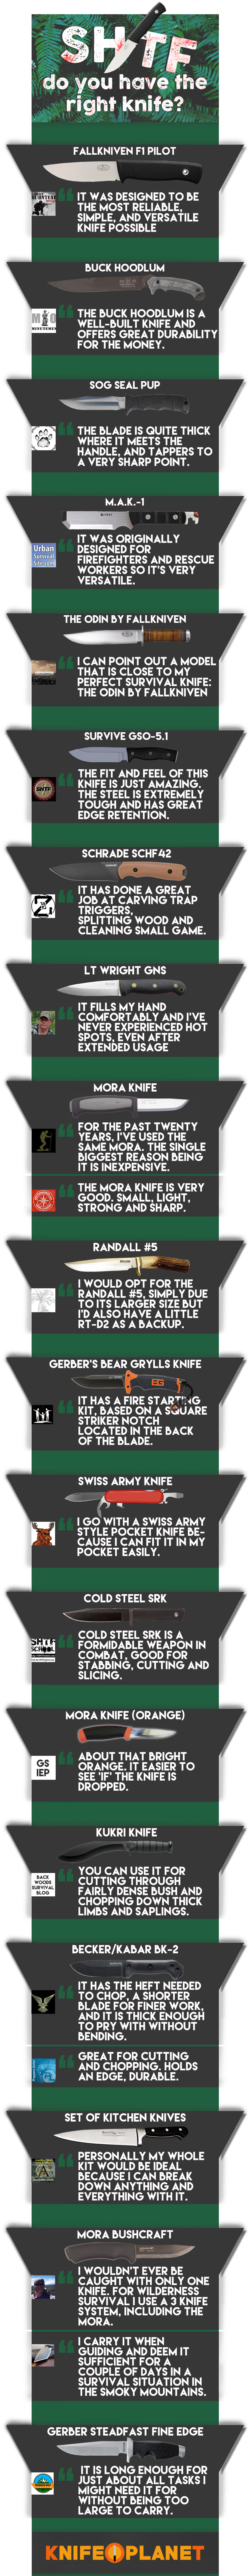 23 Survival Experts Share Their Knife Of Choice